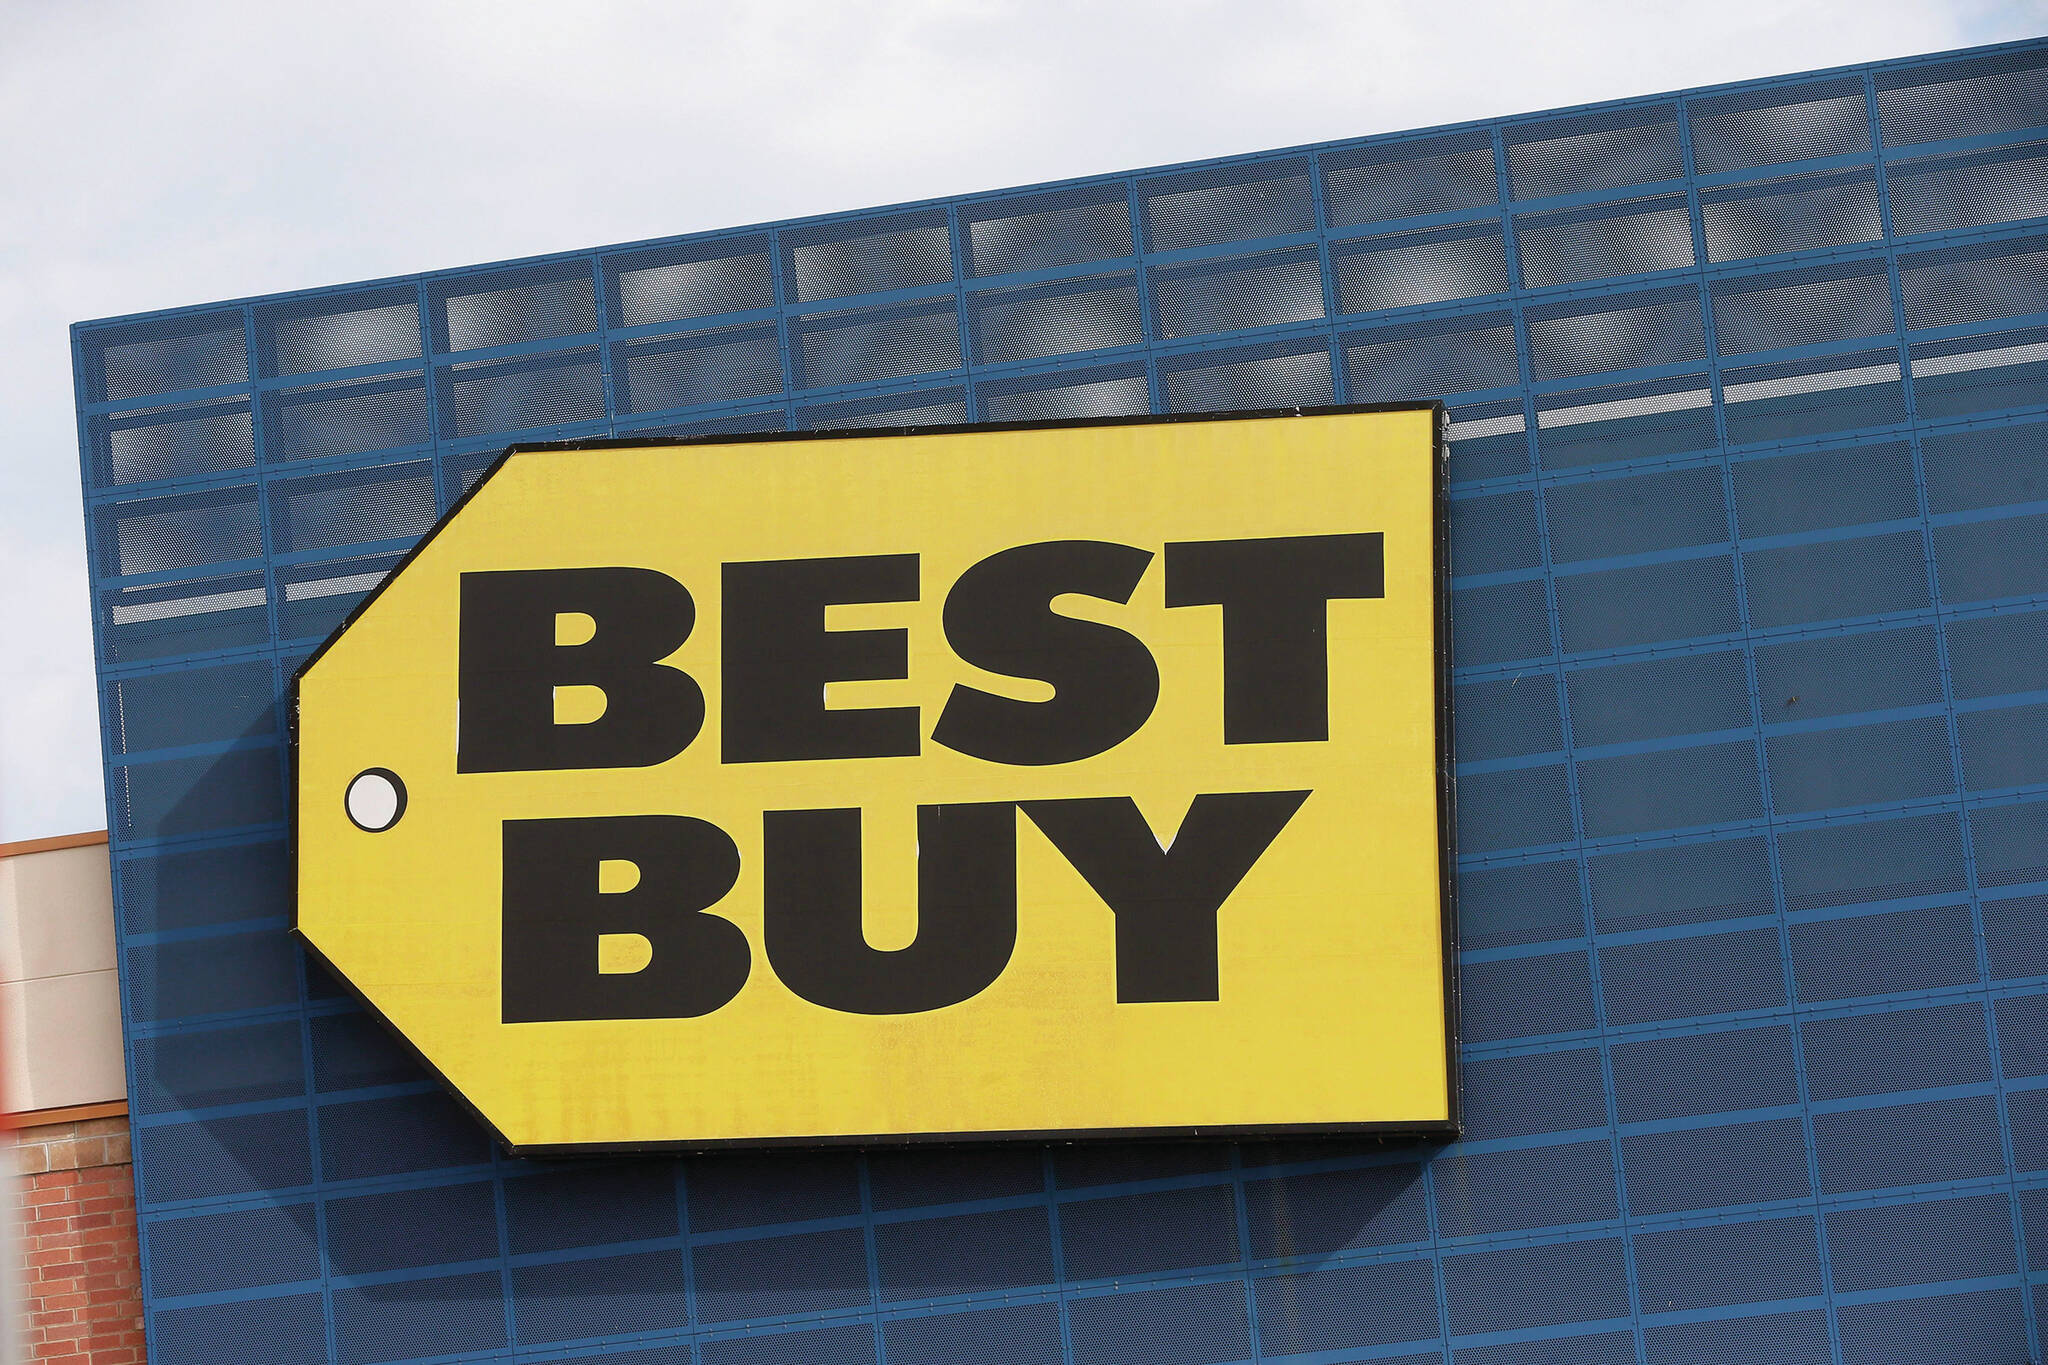 In this Aug. 27, 2019 photo, the Best Buy logo is shown on a store in Richfield, Minn. Best Buy announced plans to lay off about 700 employees in Canada in January. (AP Photo/Jim Mone)